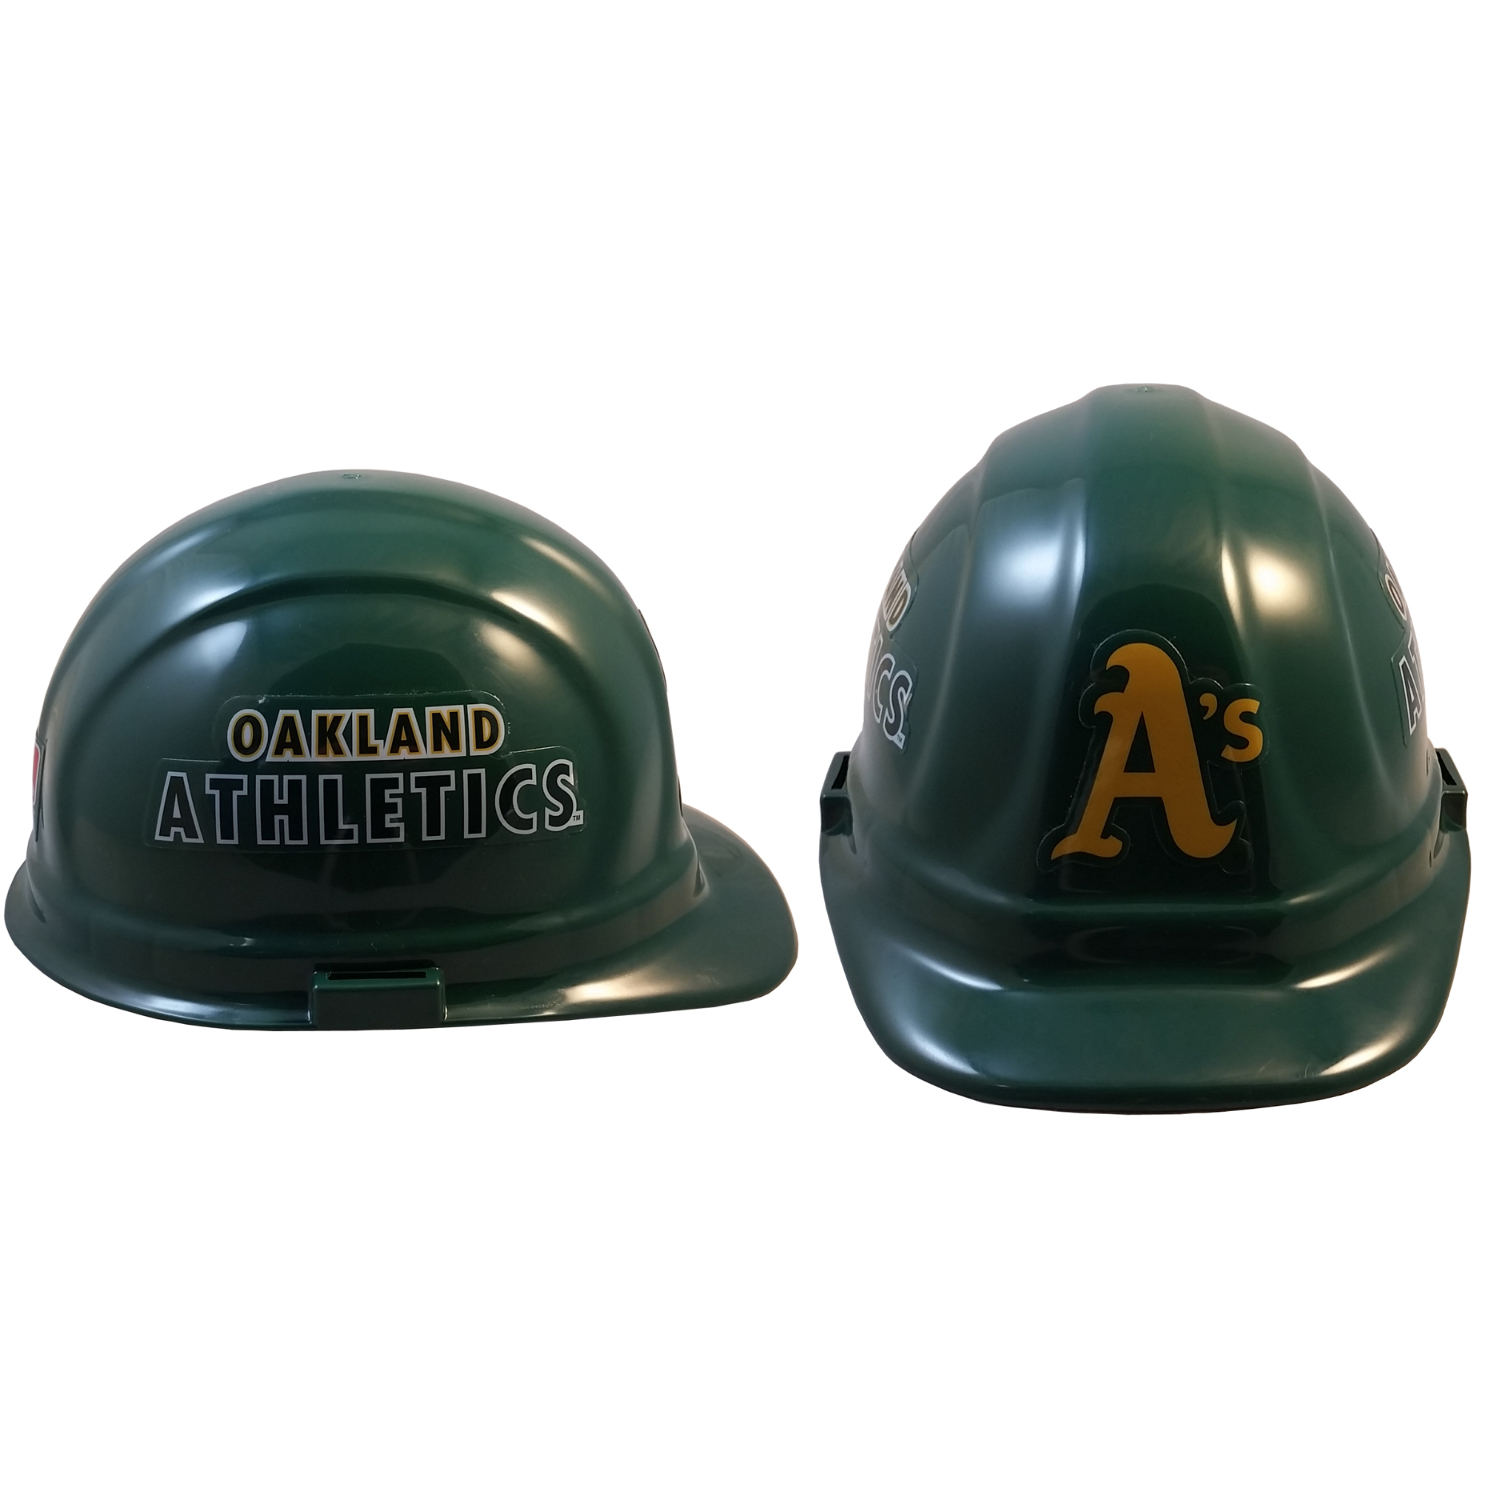 All MLB Hard Hats with Ratchet Suspensions